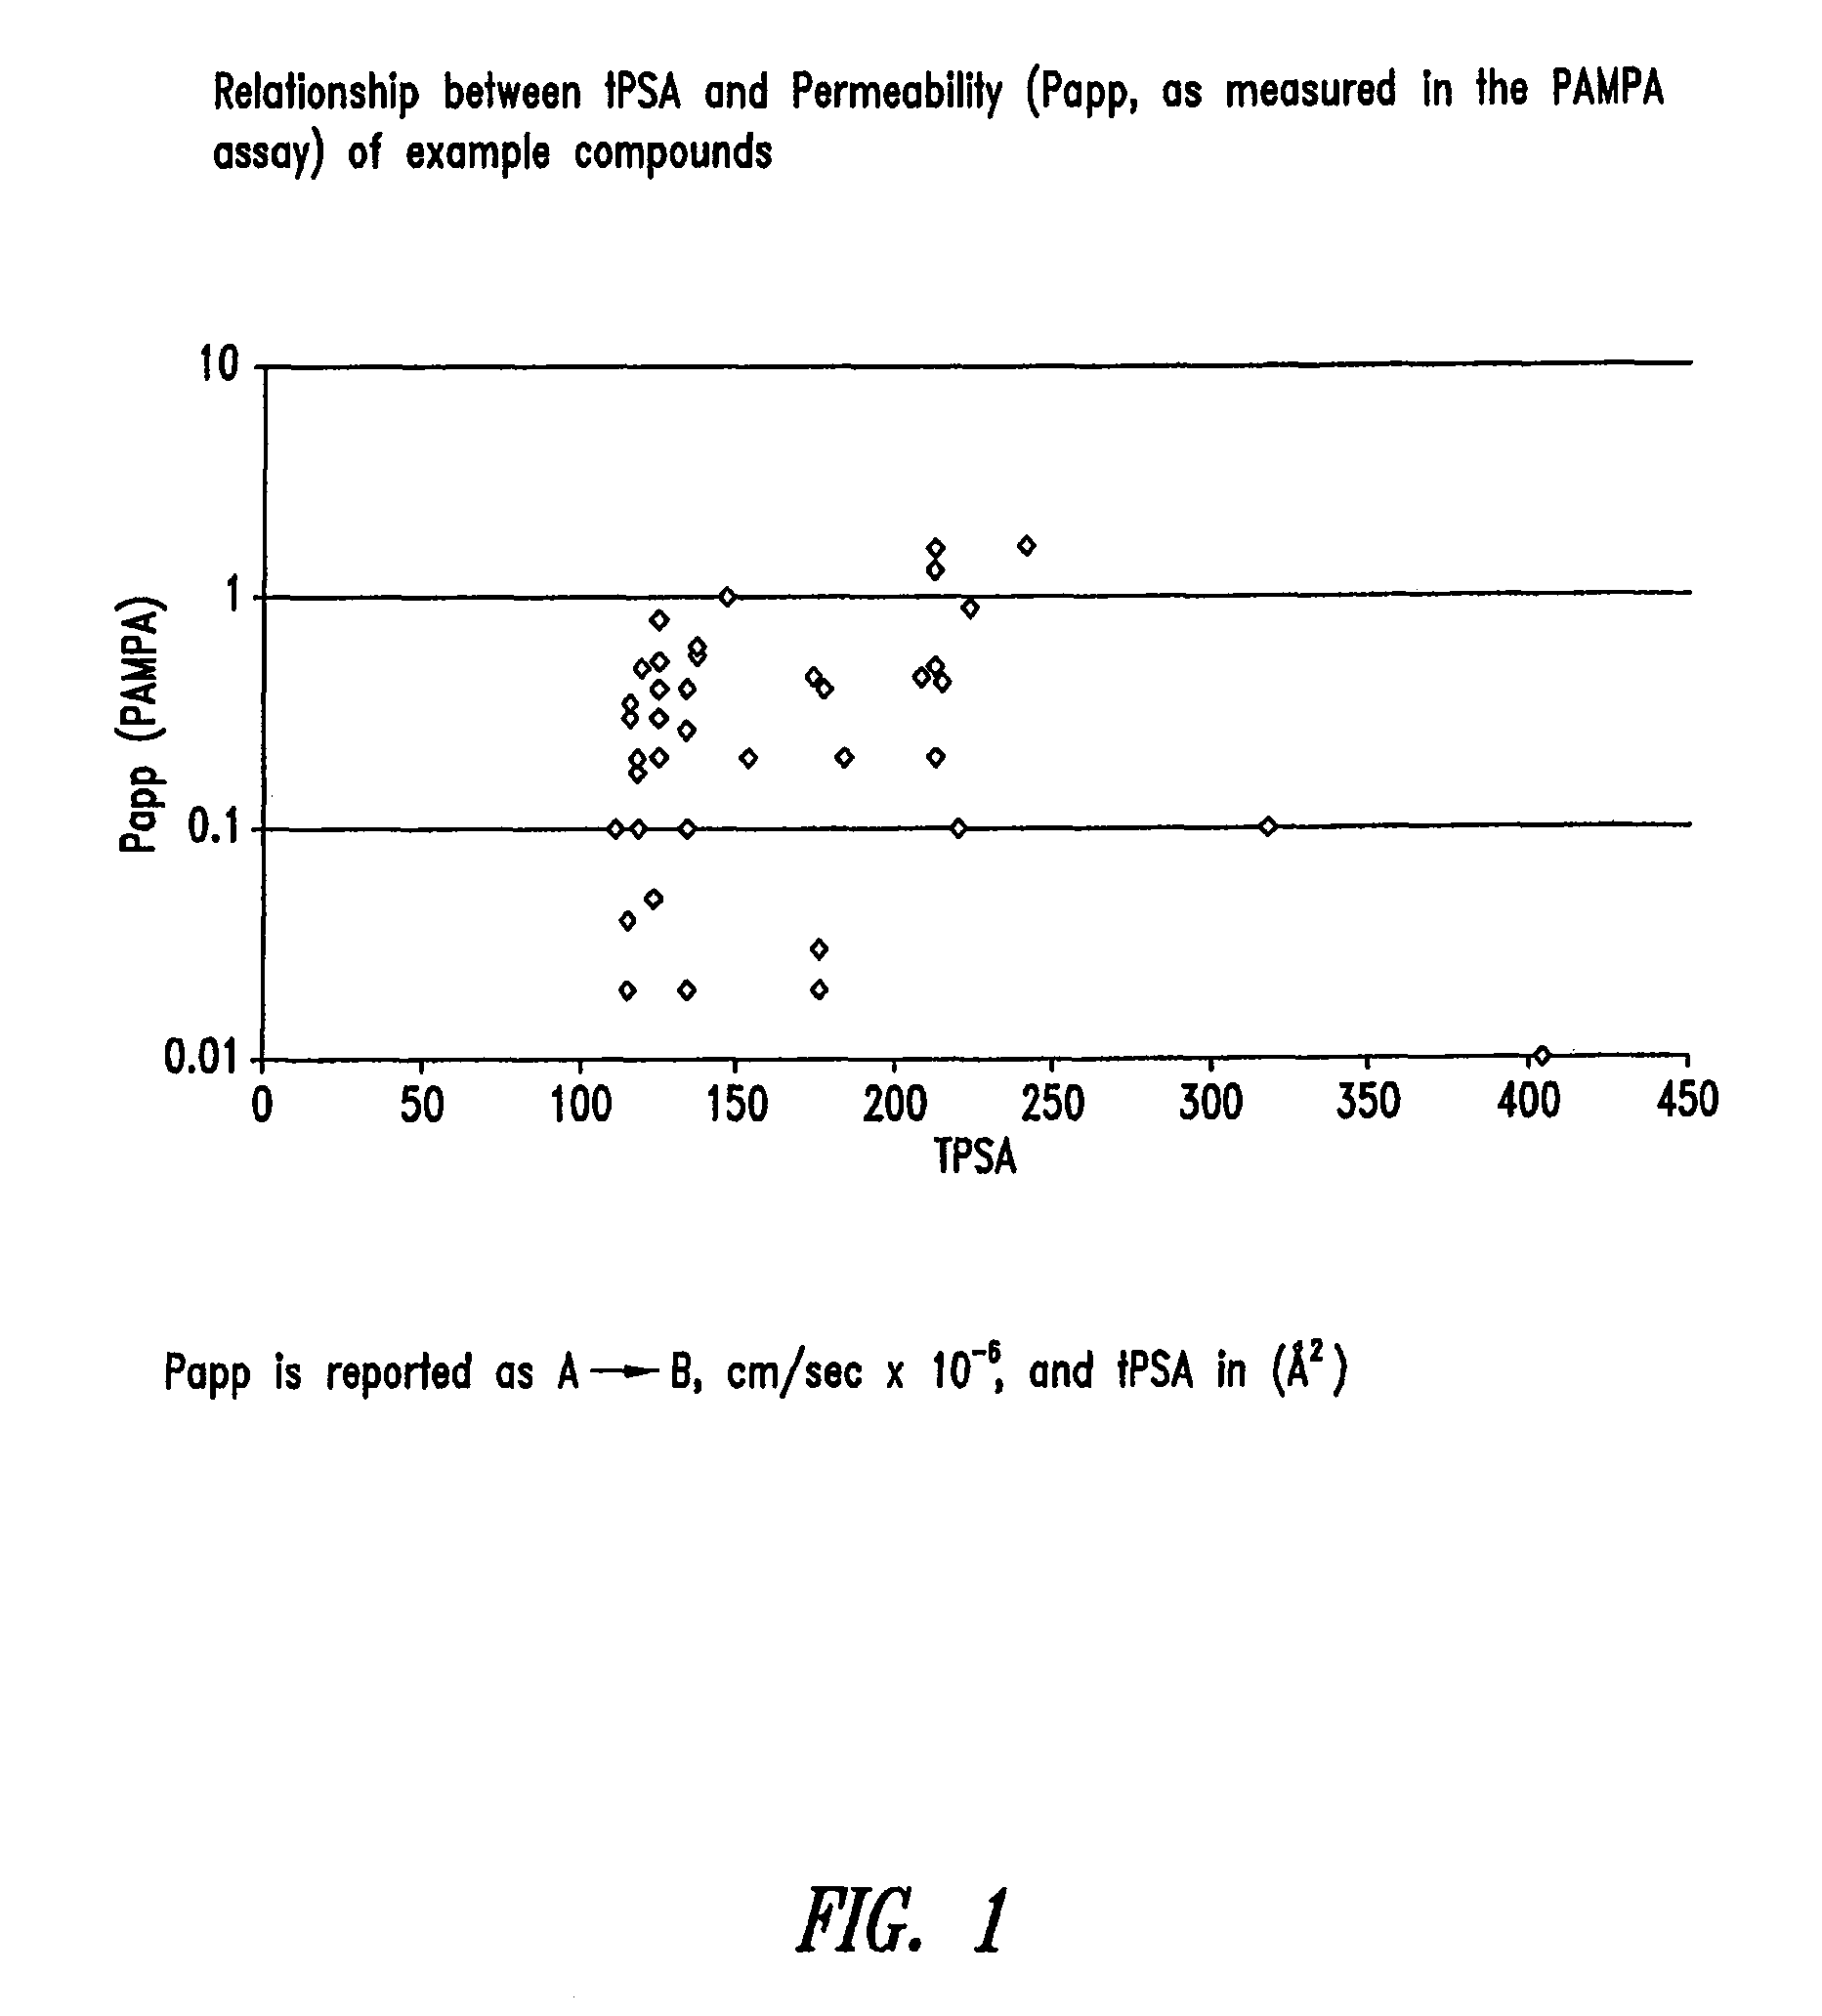 Compounds and methods for inhibiting NHE-mediated antiport in the treatment of disorders associated with fluid retention or salt overload and gastrointestinal tract disorders